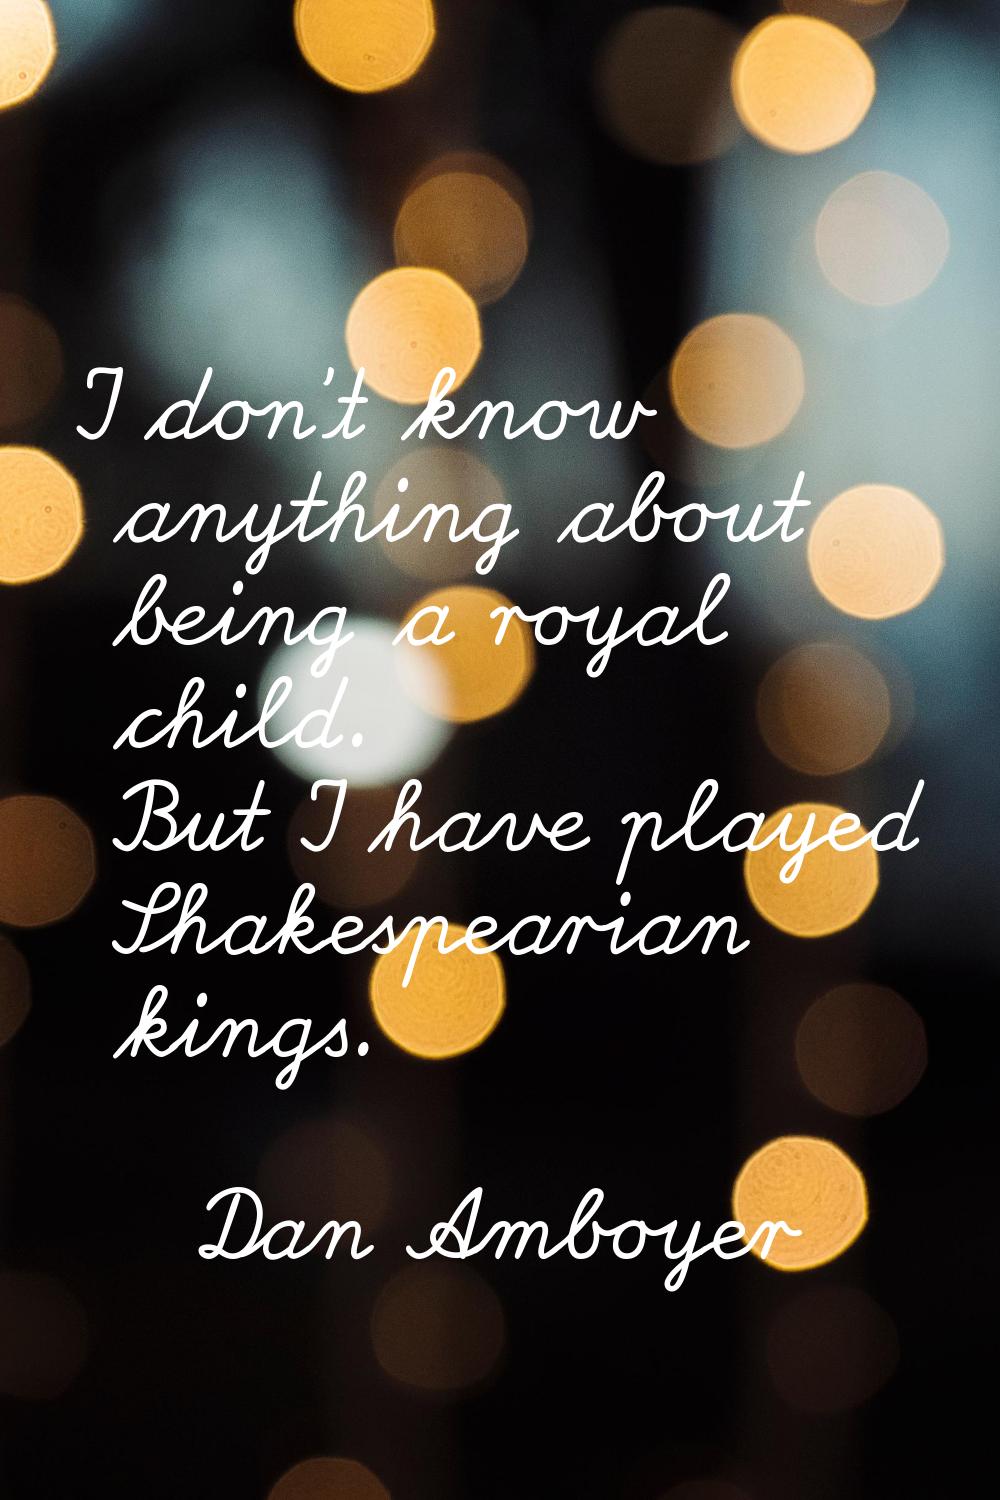 I don't know anything about being a royal child. But I have played Shakespearian kings.